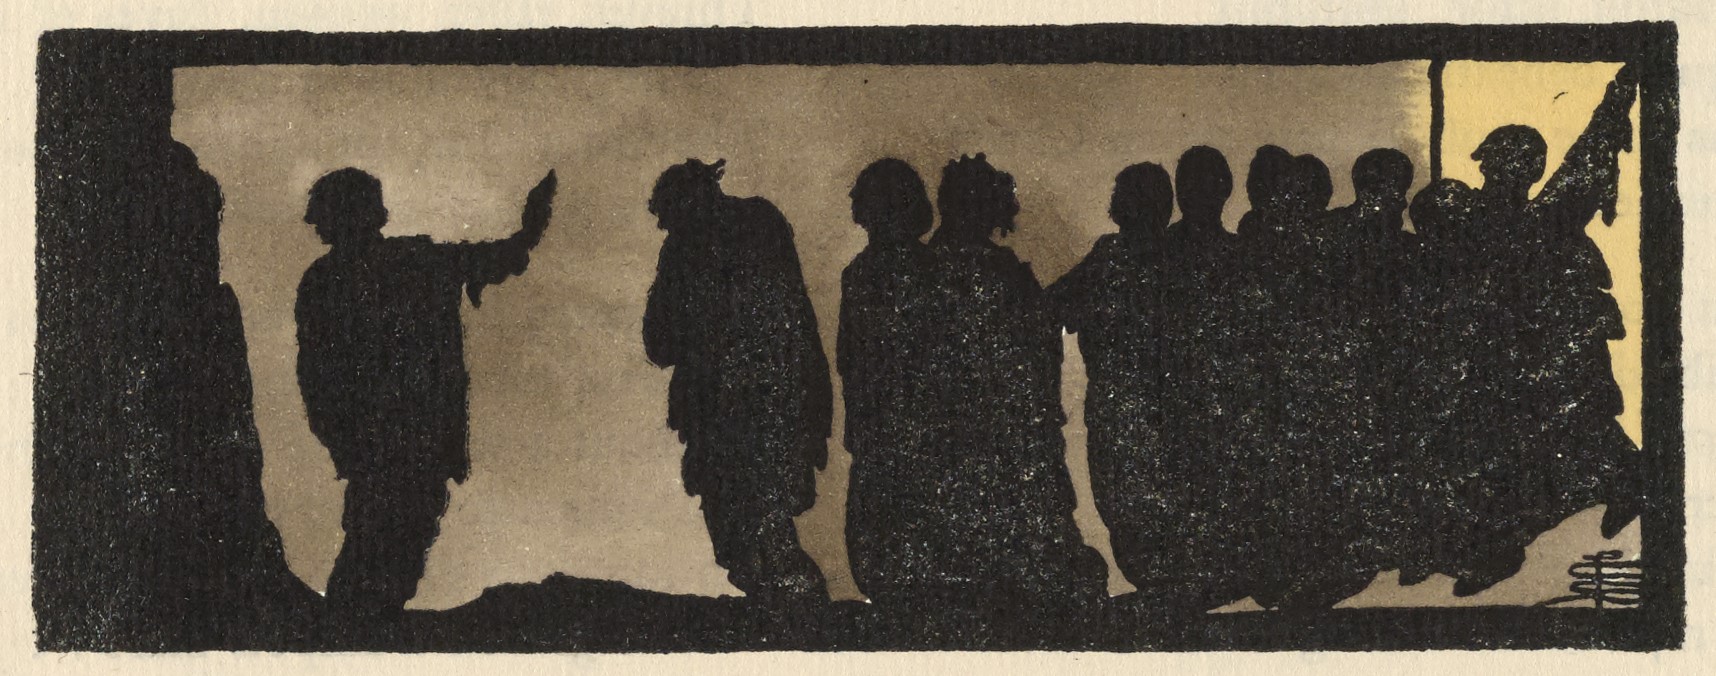 The image is centered on the page, separating the poem “A Ballad of a Night Refuge” from the next poem, “A Pagan Rhyme.” It is outlined in a rectangular black border, in landscape orientation. Against a light brown backdrop, several men are depicted in silhouette. The image illustrates a scene from “A Ballad of a Night Refuge” in which a “mad cripple” addresses a group of men. The “cripple” stands at the left of the image, facing the men on the right. On the far right, several military men descend steps into the room. The artist’s monogram is in the bottom right corner of the frame.